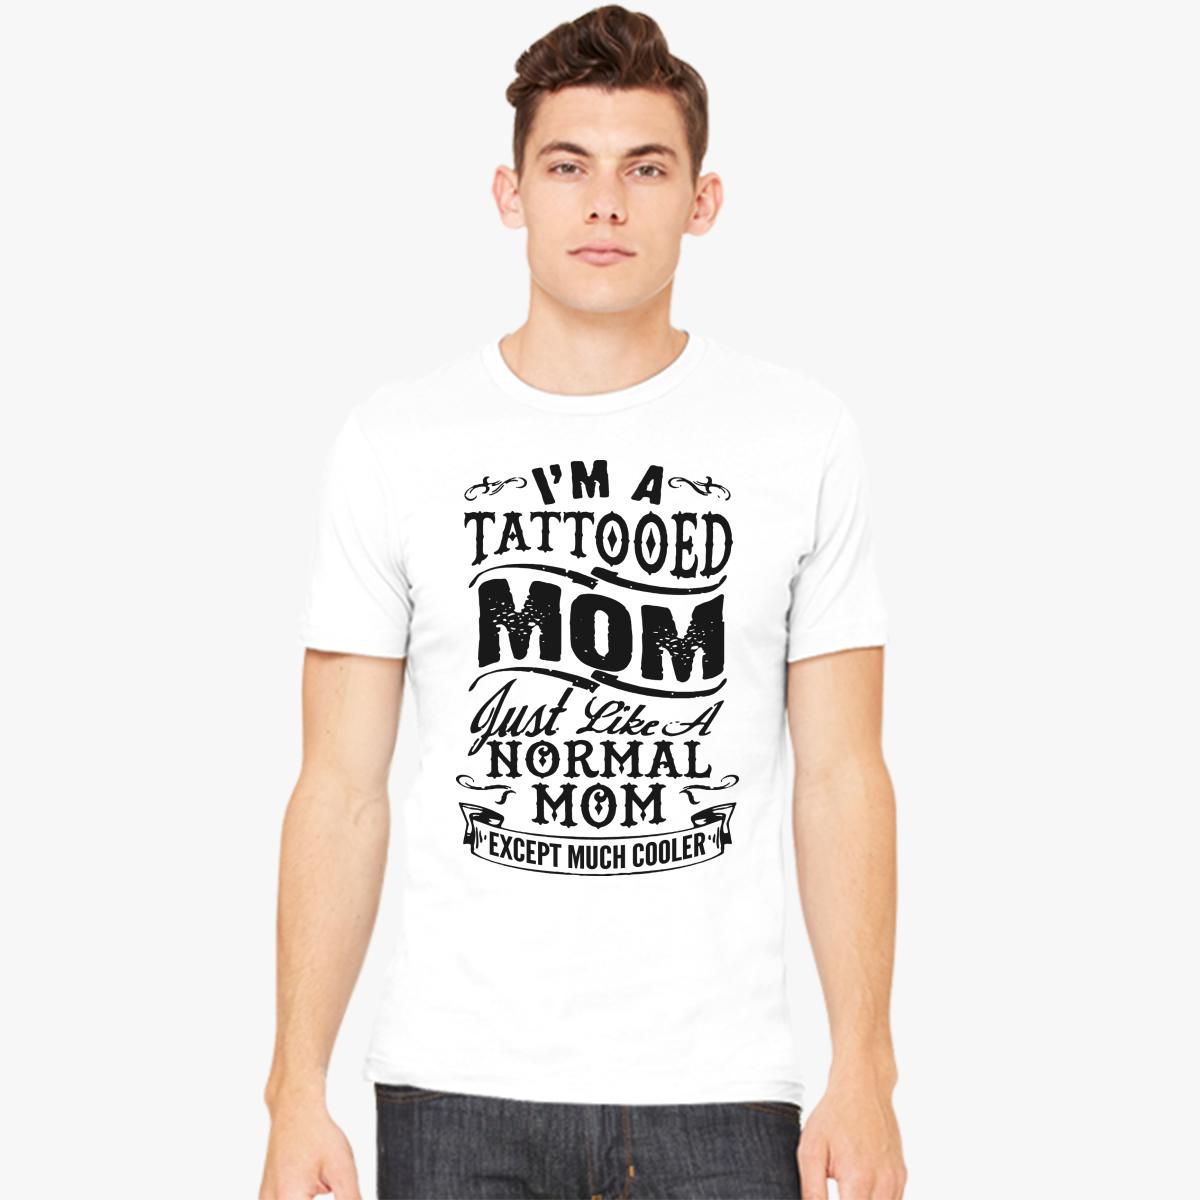 I am tattooed mom just like a normal mom except much cooler Womens Tshirt   Kidozi